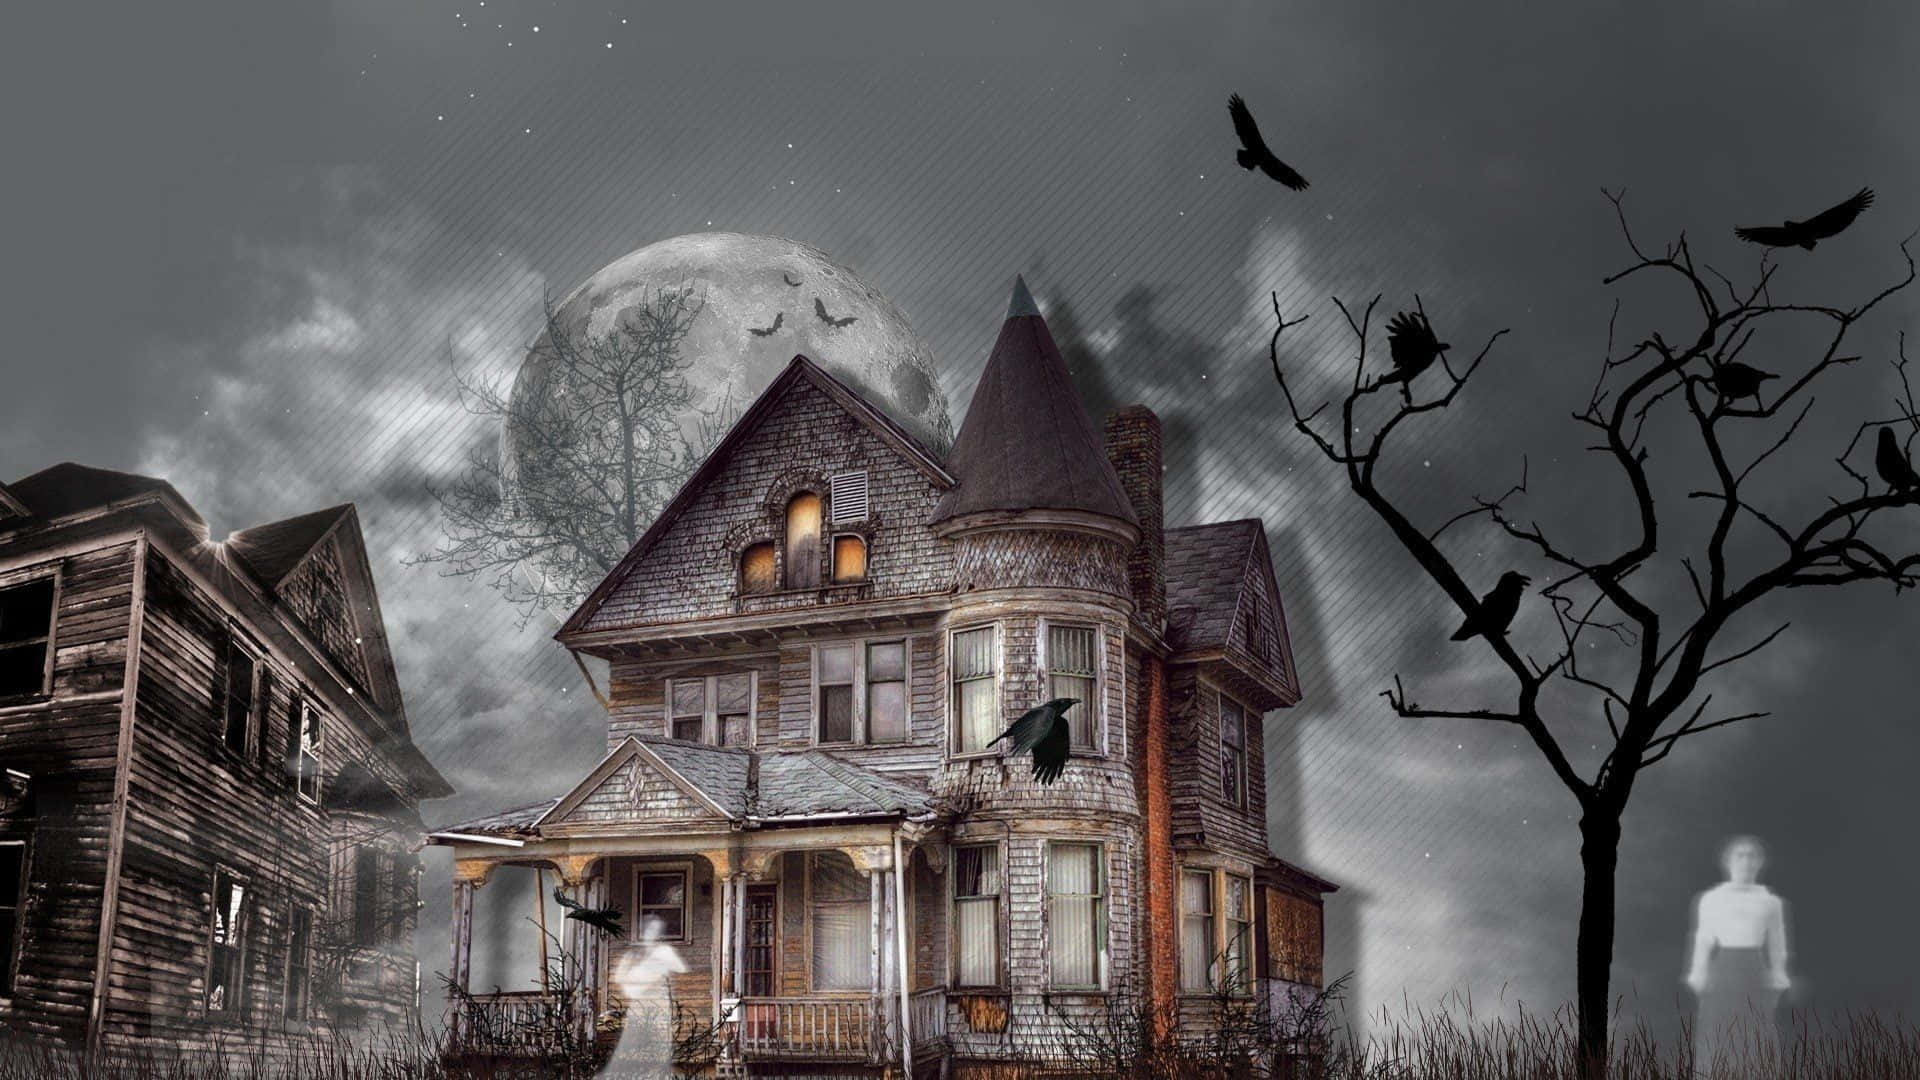 "A foreboding image of a Haunted House on a dark and stormy night"